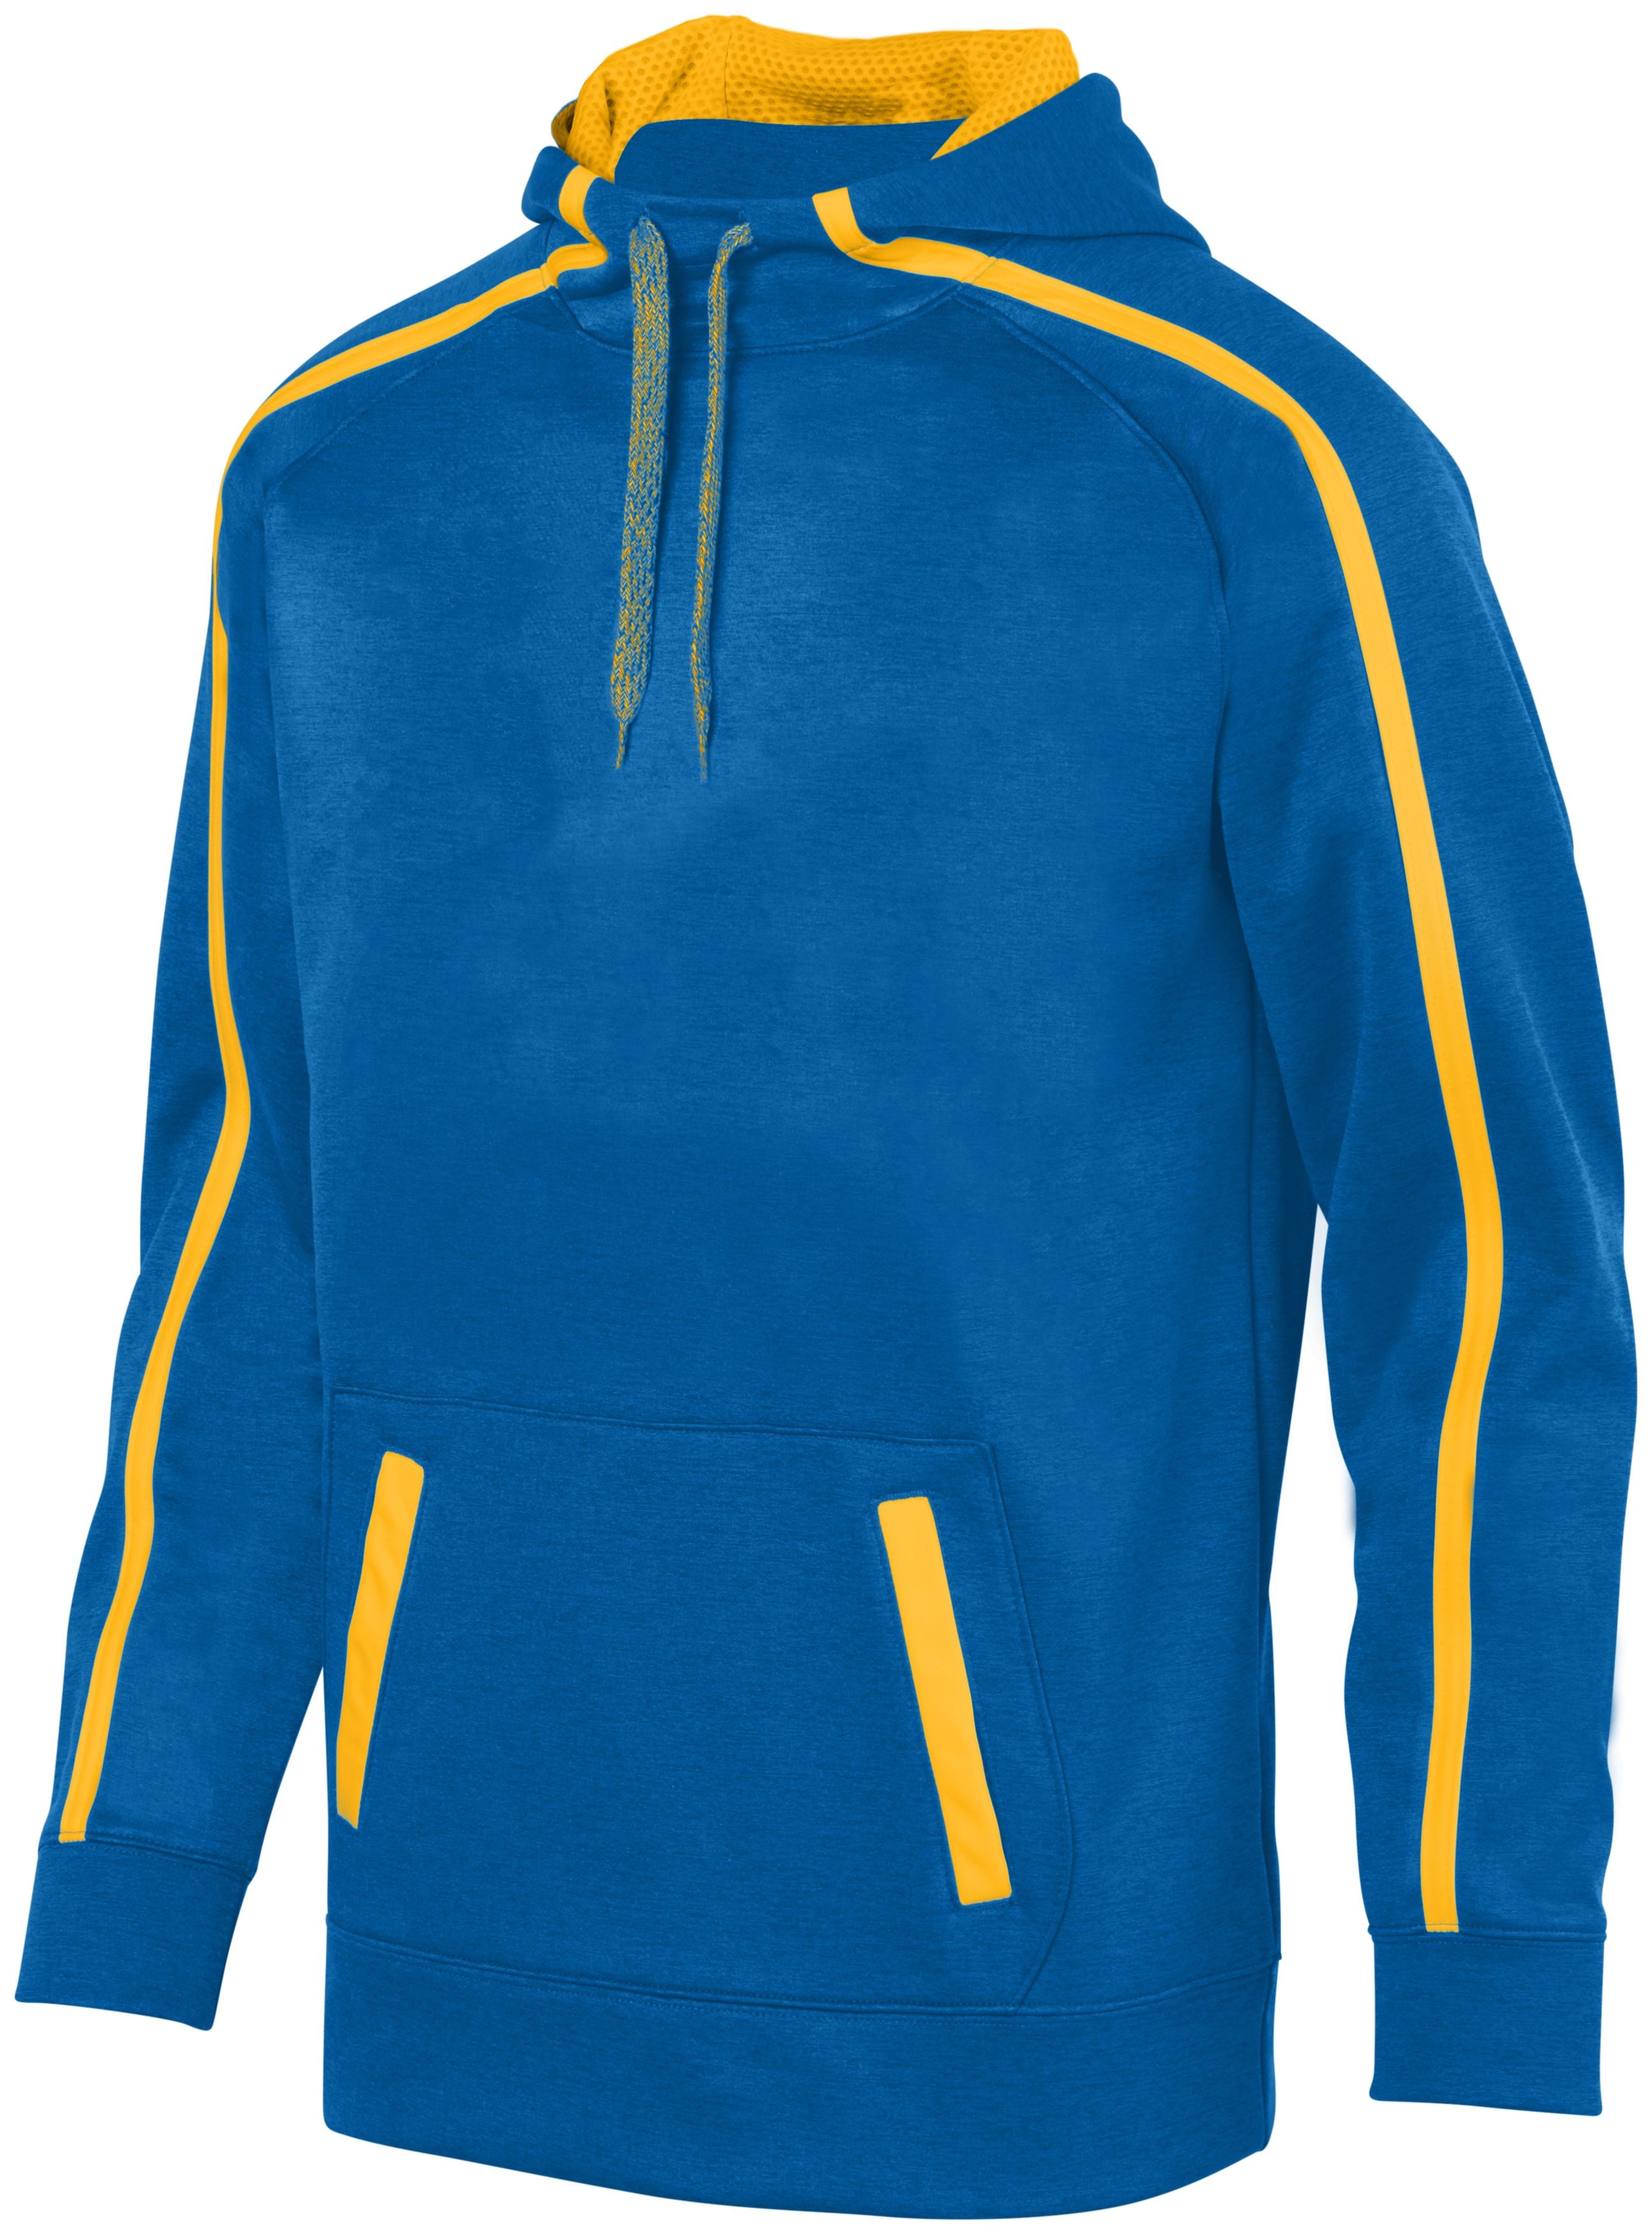 Augusta Sportswear Youth Stoked Tonal Heather Hoodie in Royal/Gold  -Part of the Youth, Augusta-Products, Shirts, Tonal-Fleece-Collection product lines at KanaleyCreations.com